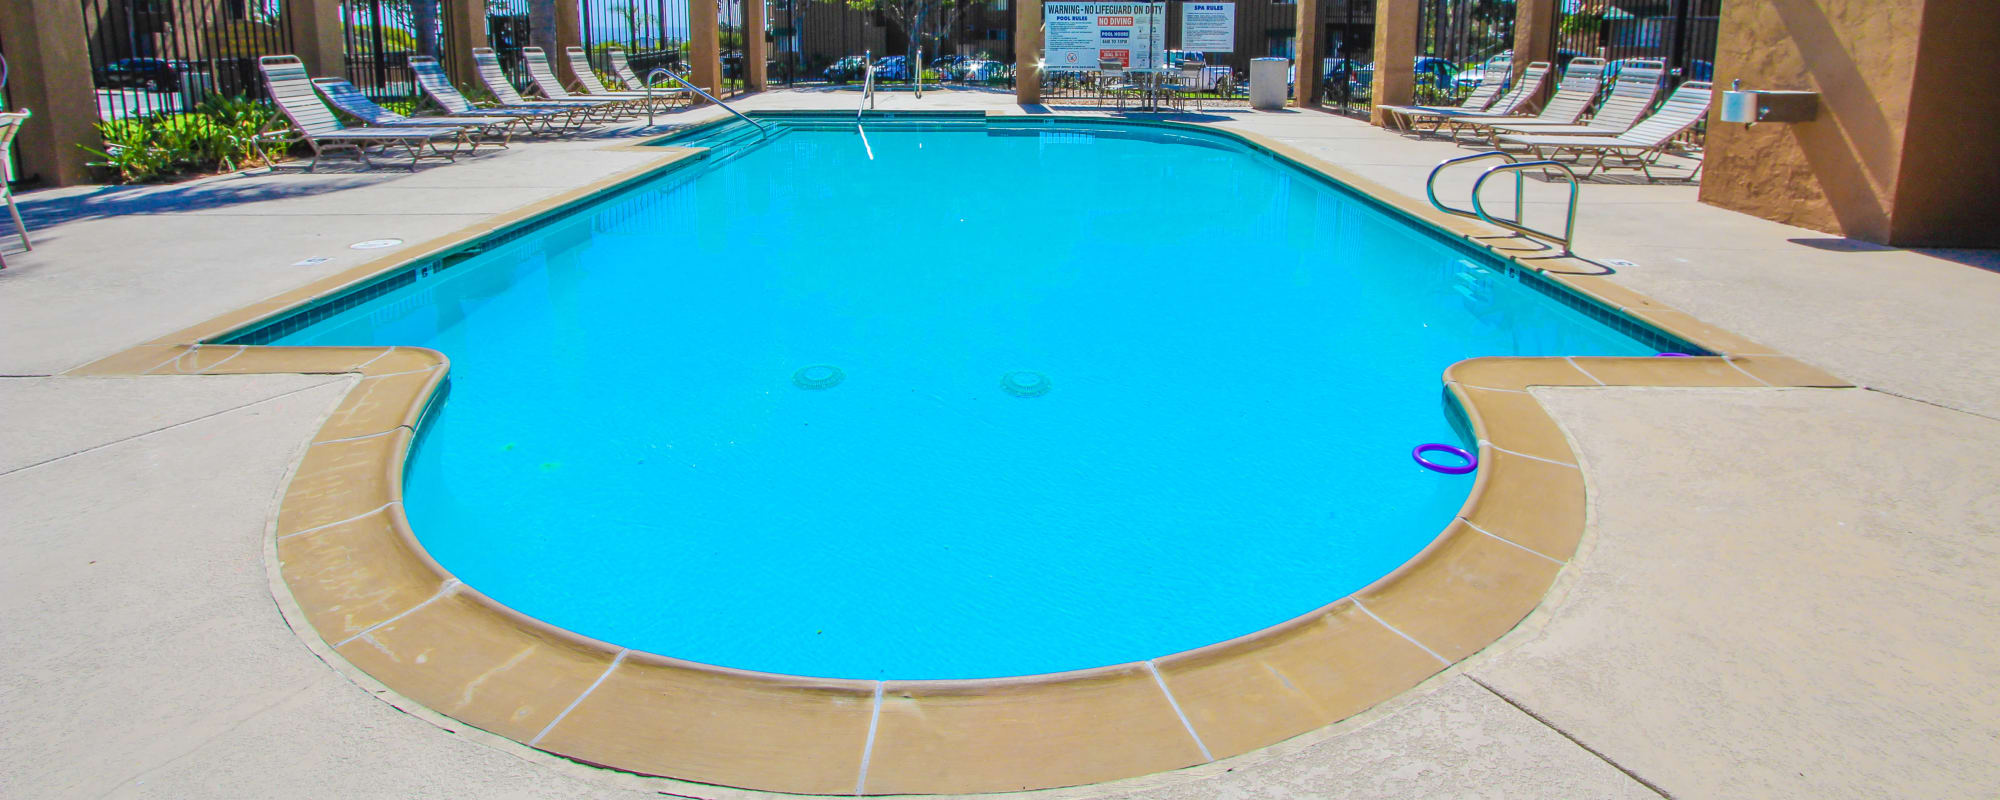 A swimming pool at Beech St. Knolls in San Diego, California